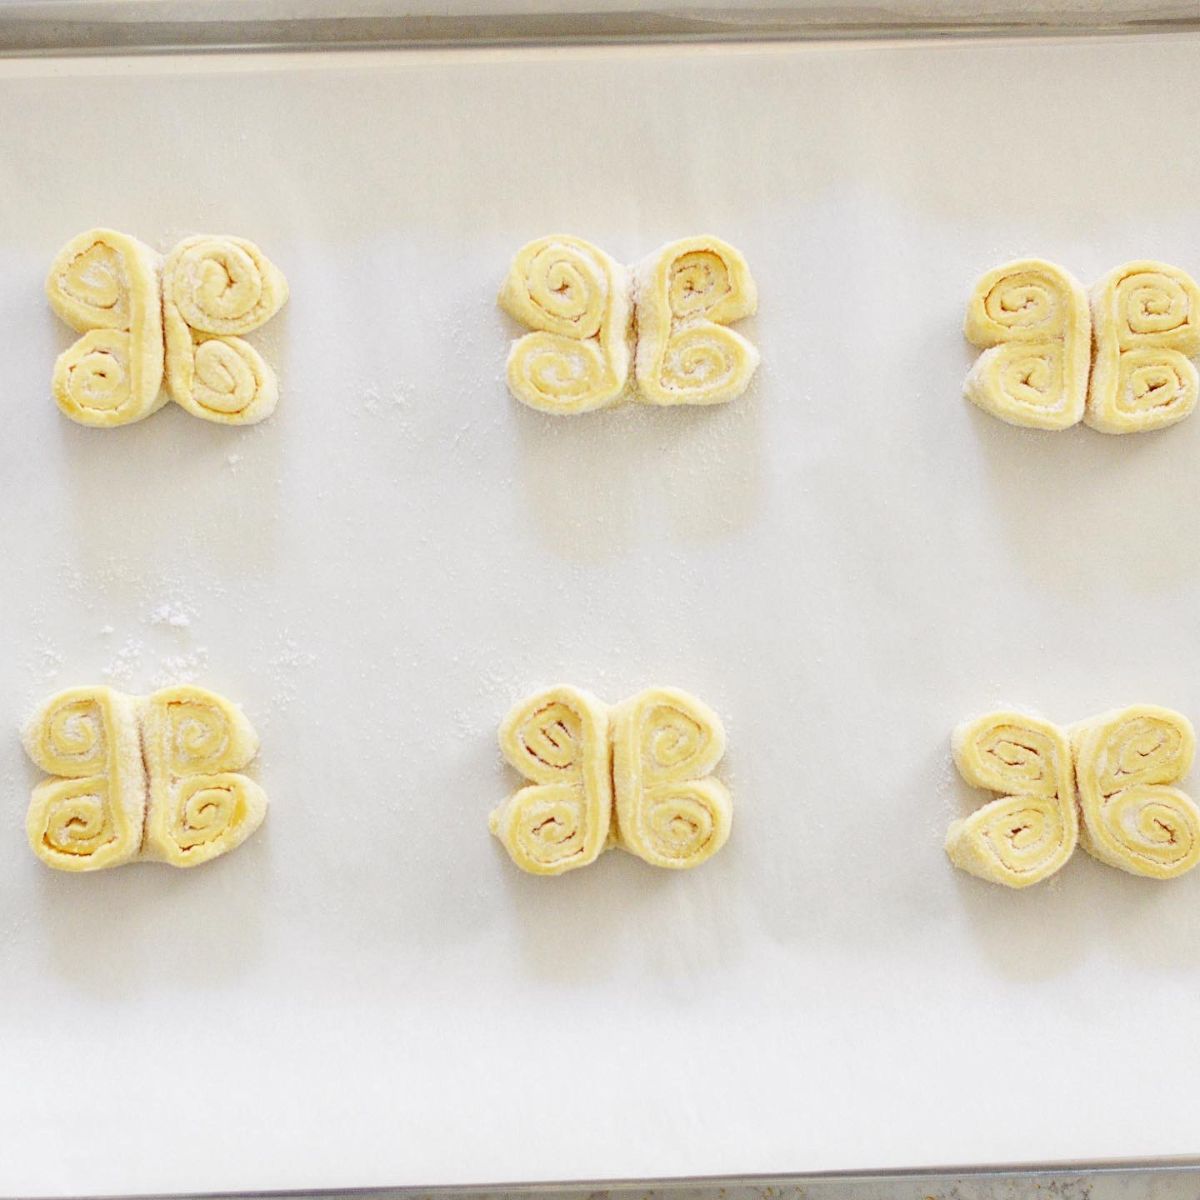 These French Palmier cookies are rolled in sugar and cut into little butterflies.